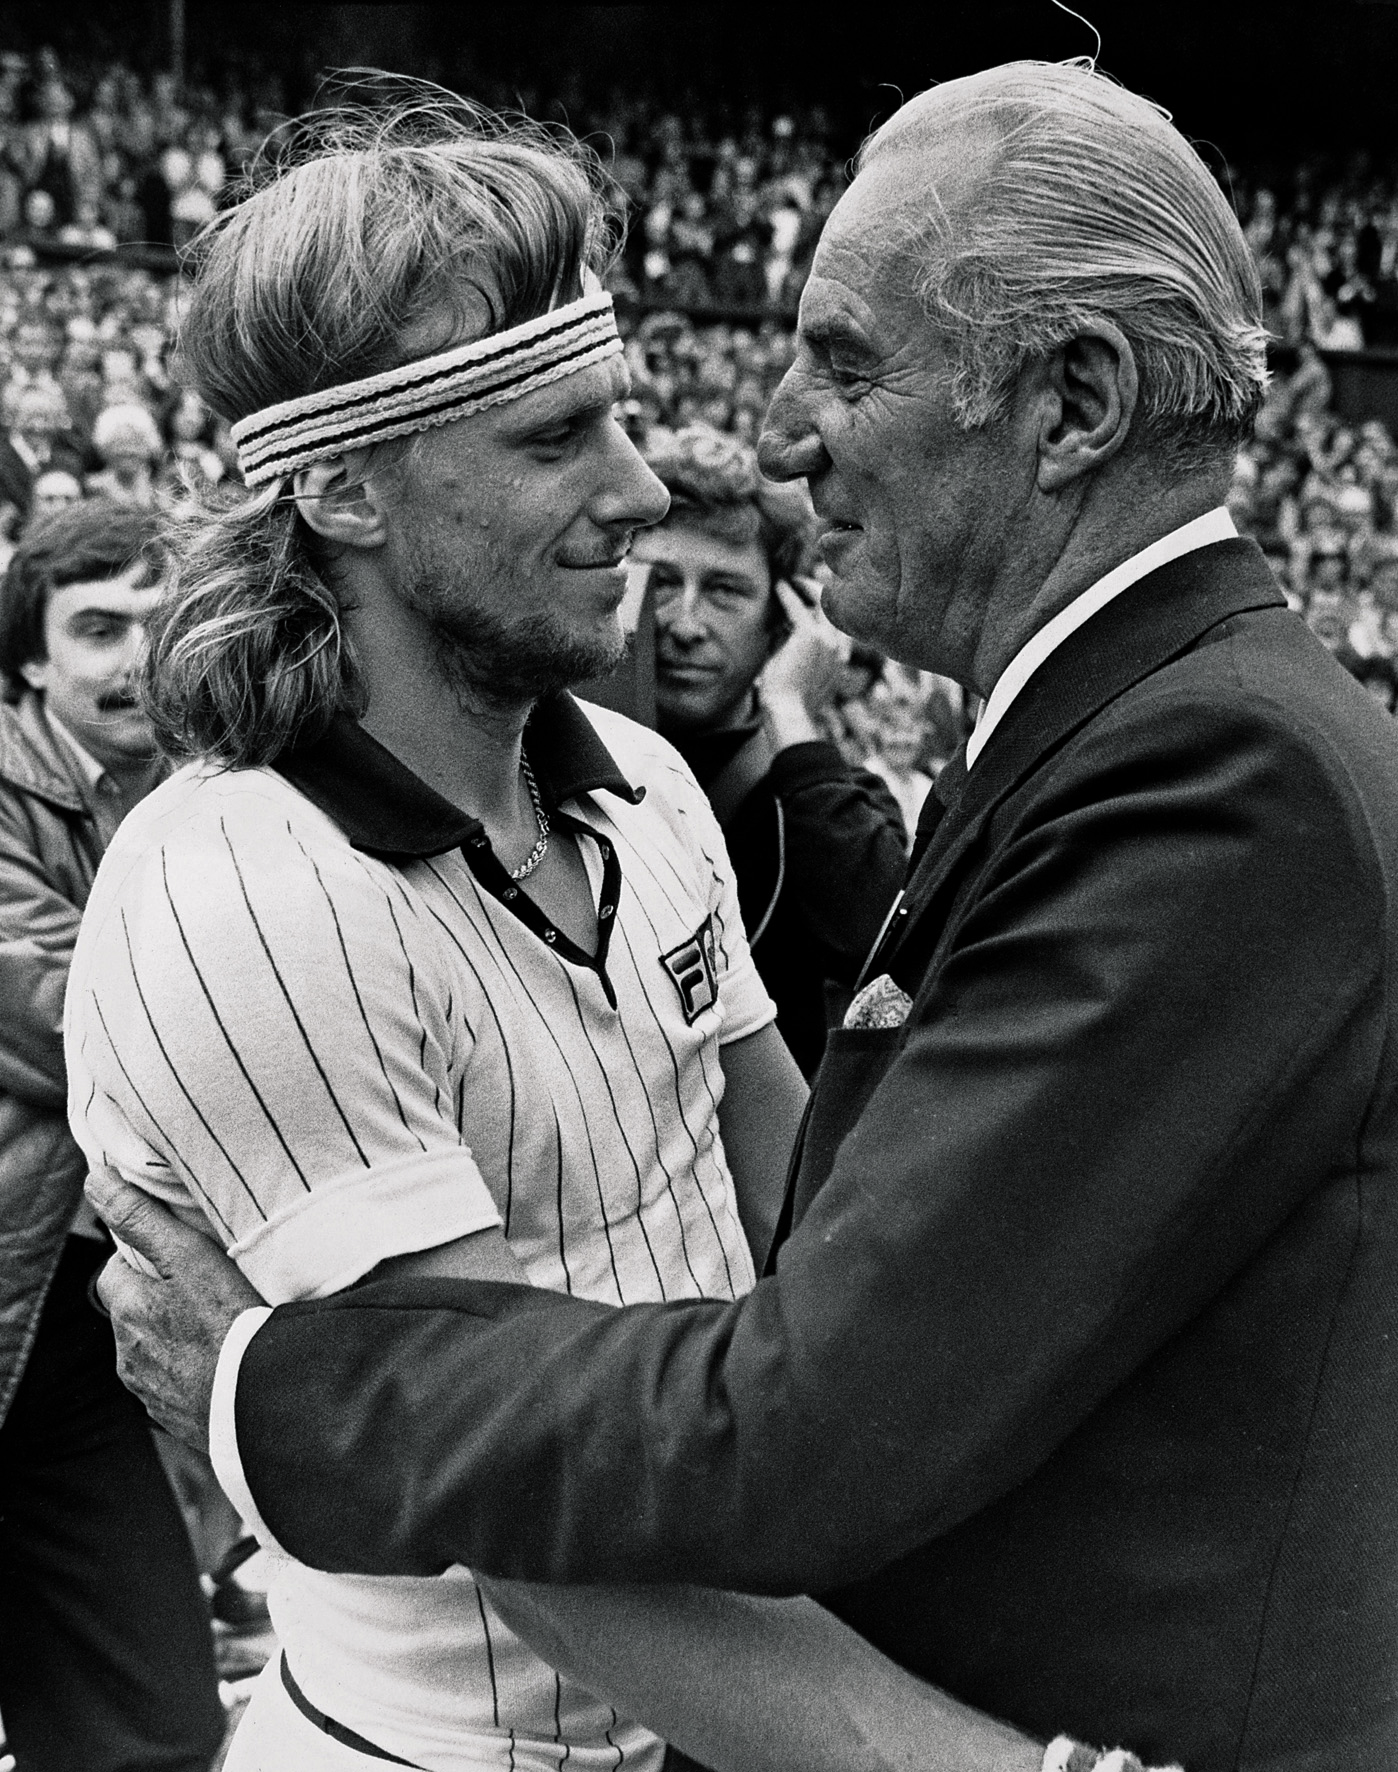  © The Stylish Life - Tennis, published by teNeues, www.teneues.com. Fred Perry Congratulates Bjorn Borg at Wimbledon in 1978, Photo © Hulton-Deutsch Collection/CORBIS. 